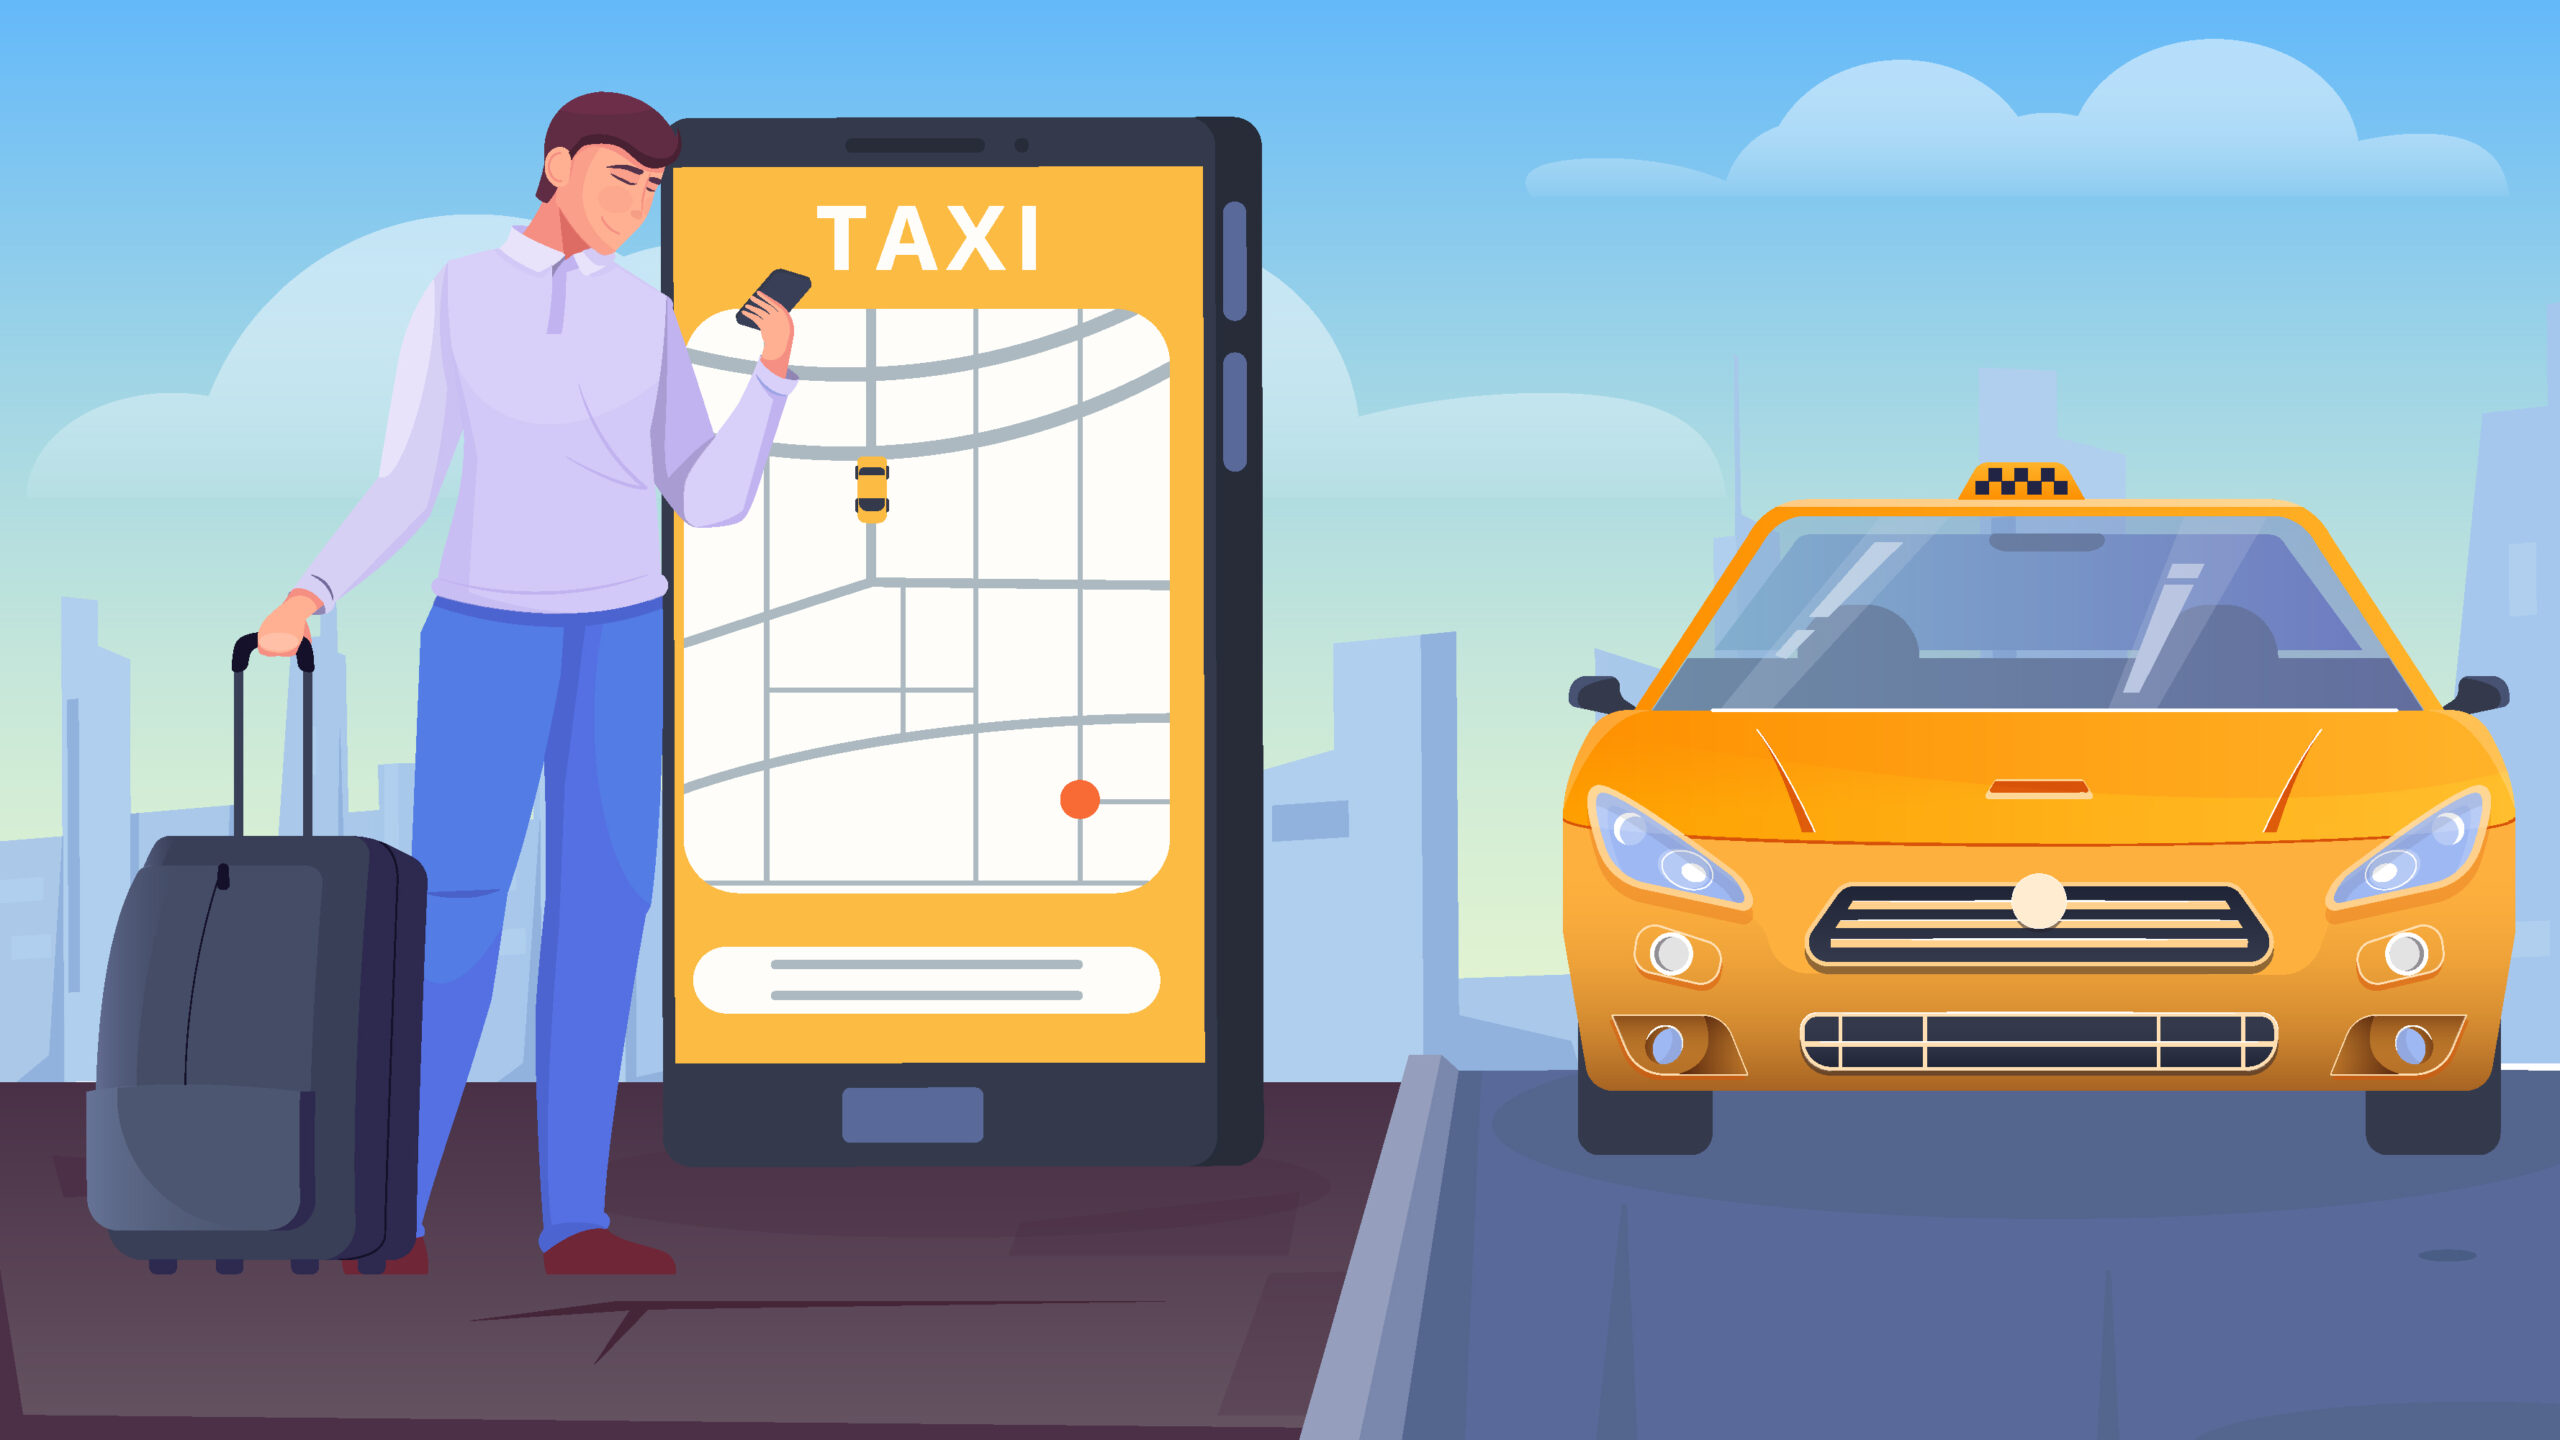 How we harnessed Machine Learning to predict taxi fares for travel patterns decision making for a taxi agency